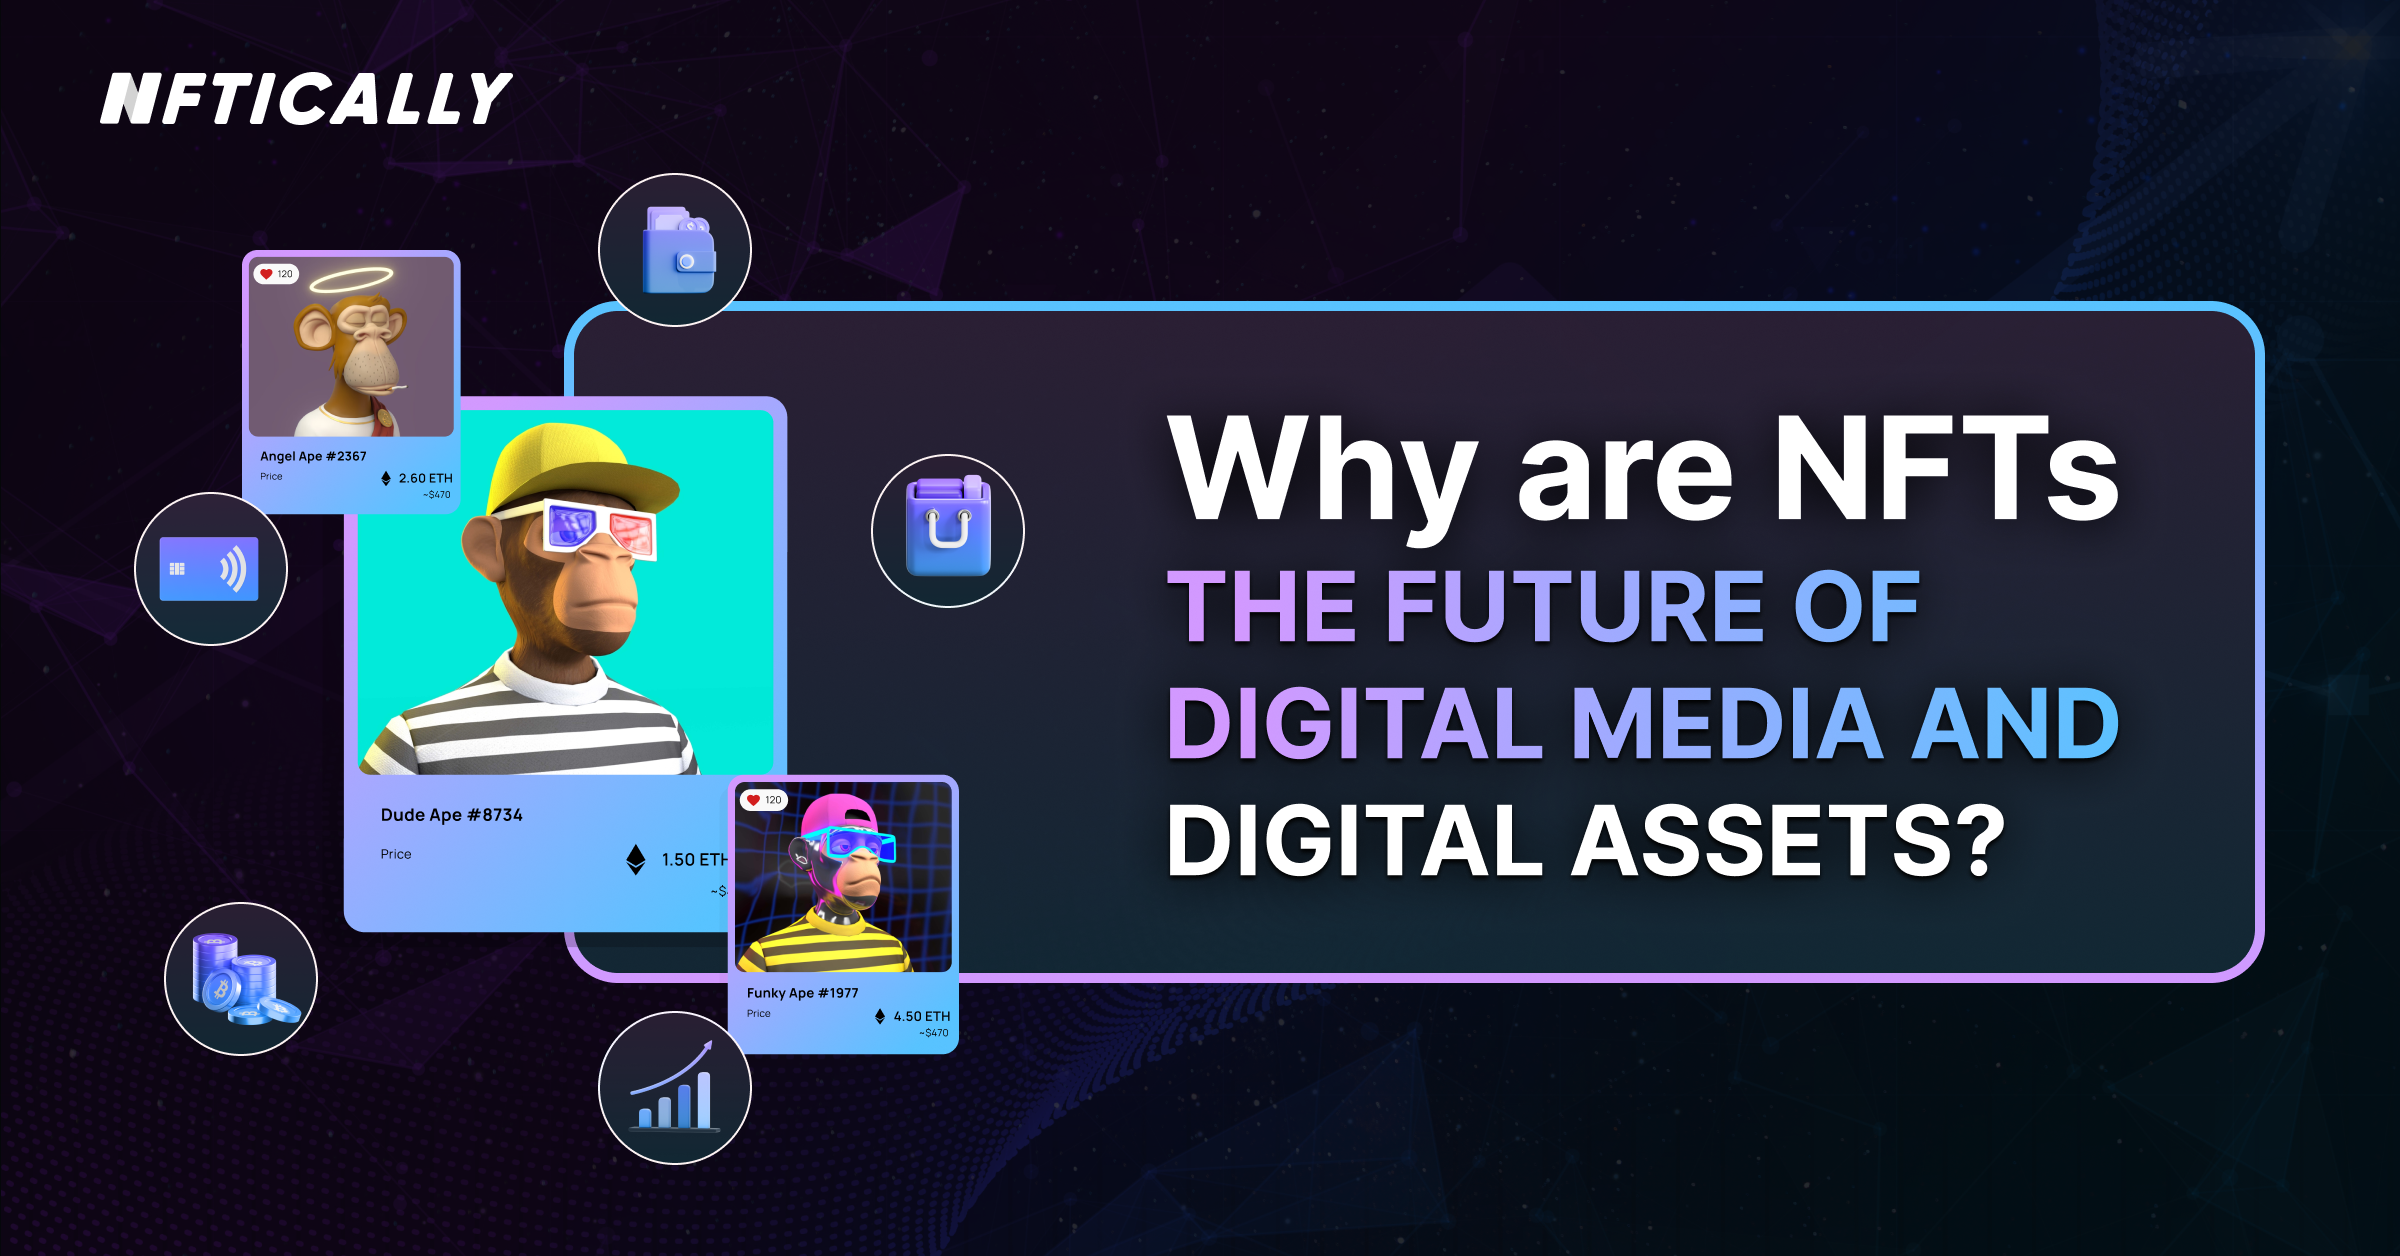 Why Are NFTs the Future of Digital Media and Digital Assets?